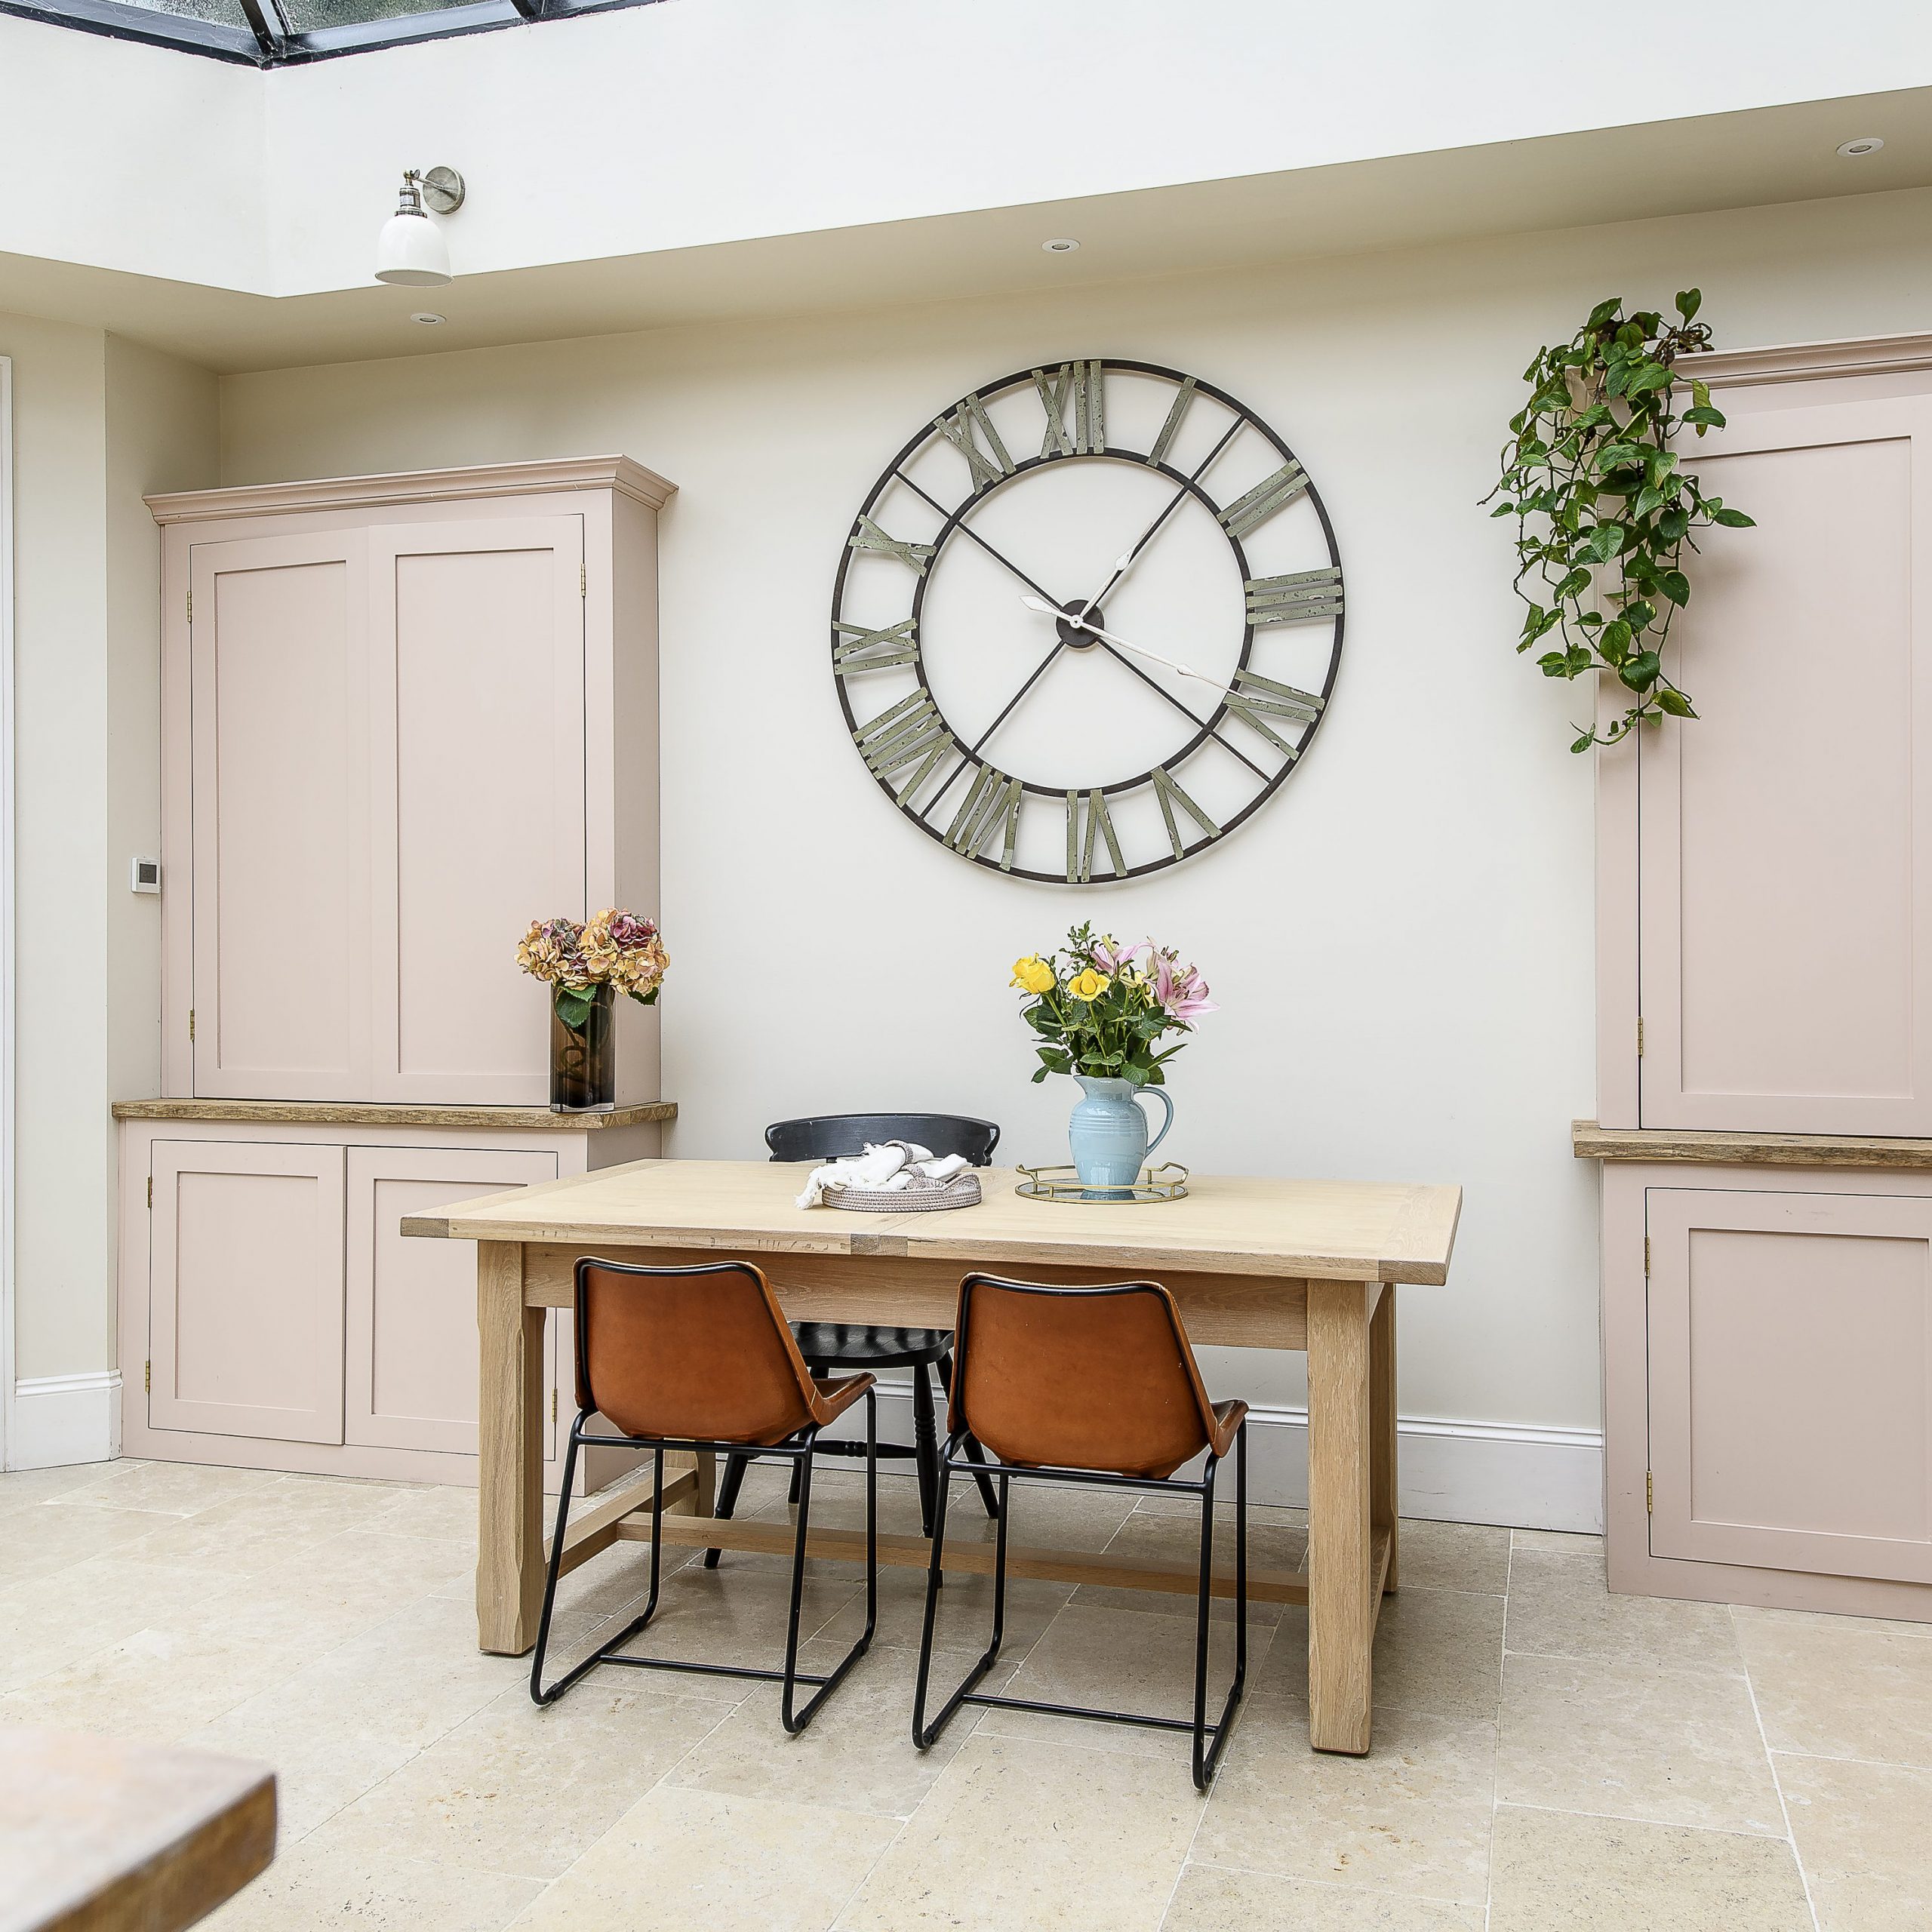 Morgan has carefully chosen the colours in the kitchen to achieve her vision for it. The cupboards are painted in Constantinople by Andrew Martin and the island unit is Farrow and Ball’s Studio Green. The walls are in Slipper Satin, also by Farrow and Ball